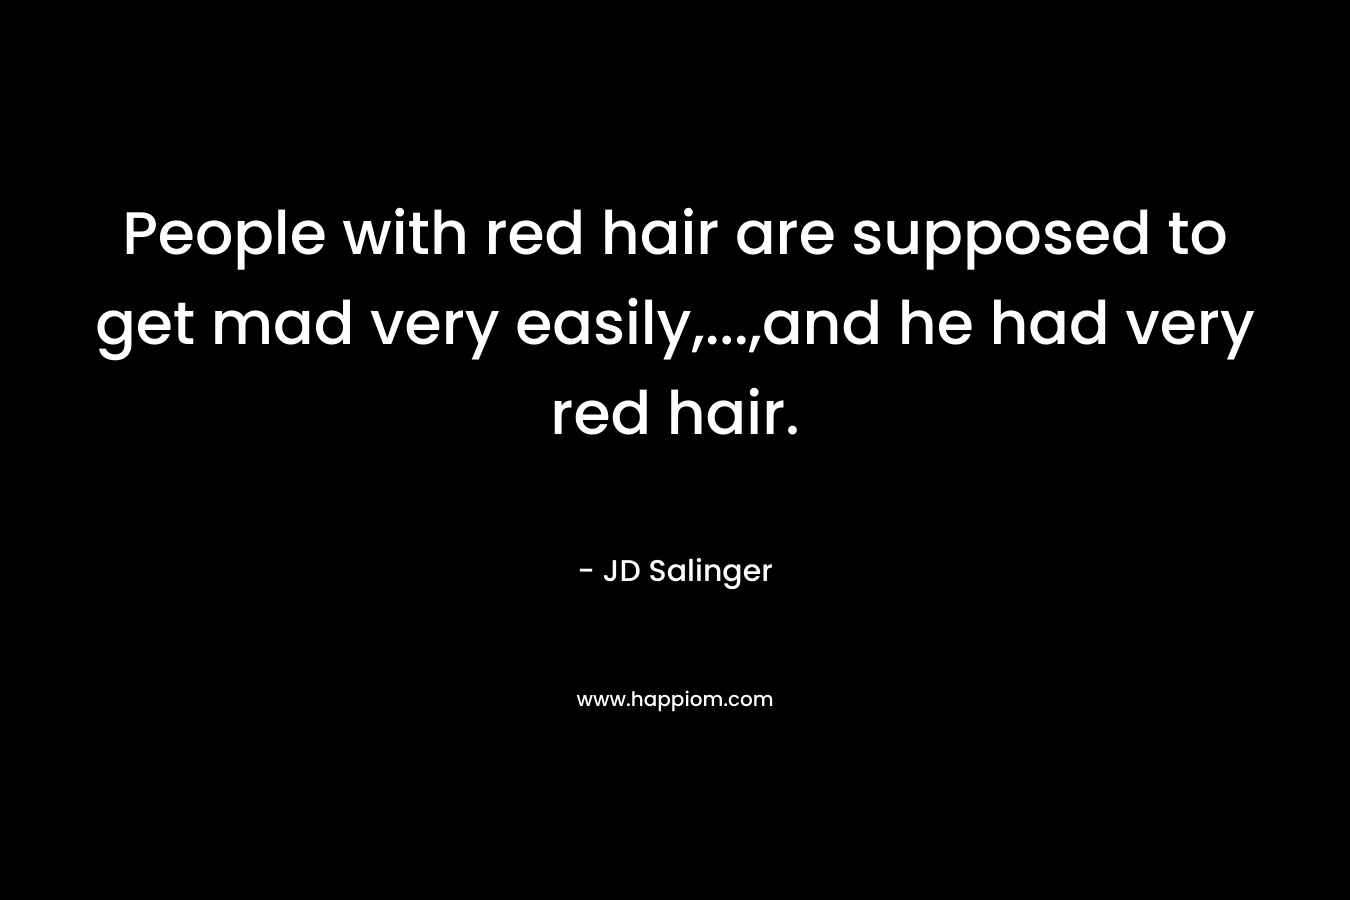 People with red hair are supposed to get mad very easily,...,and he had very red hair.